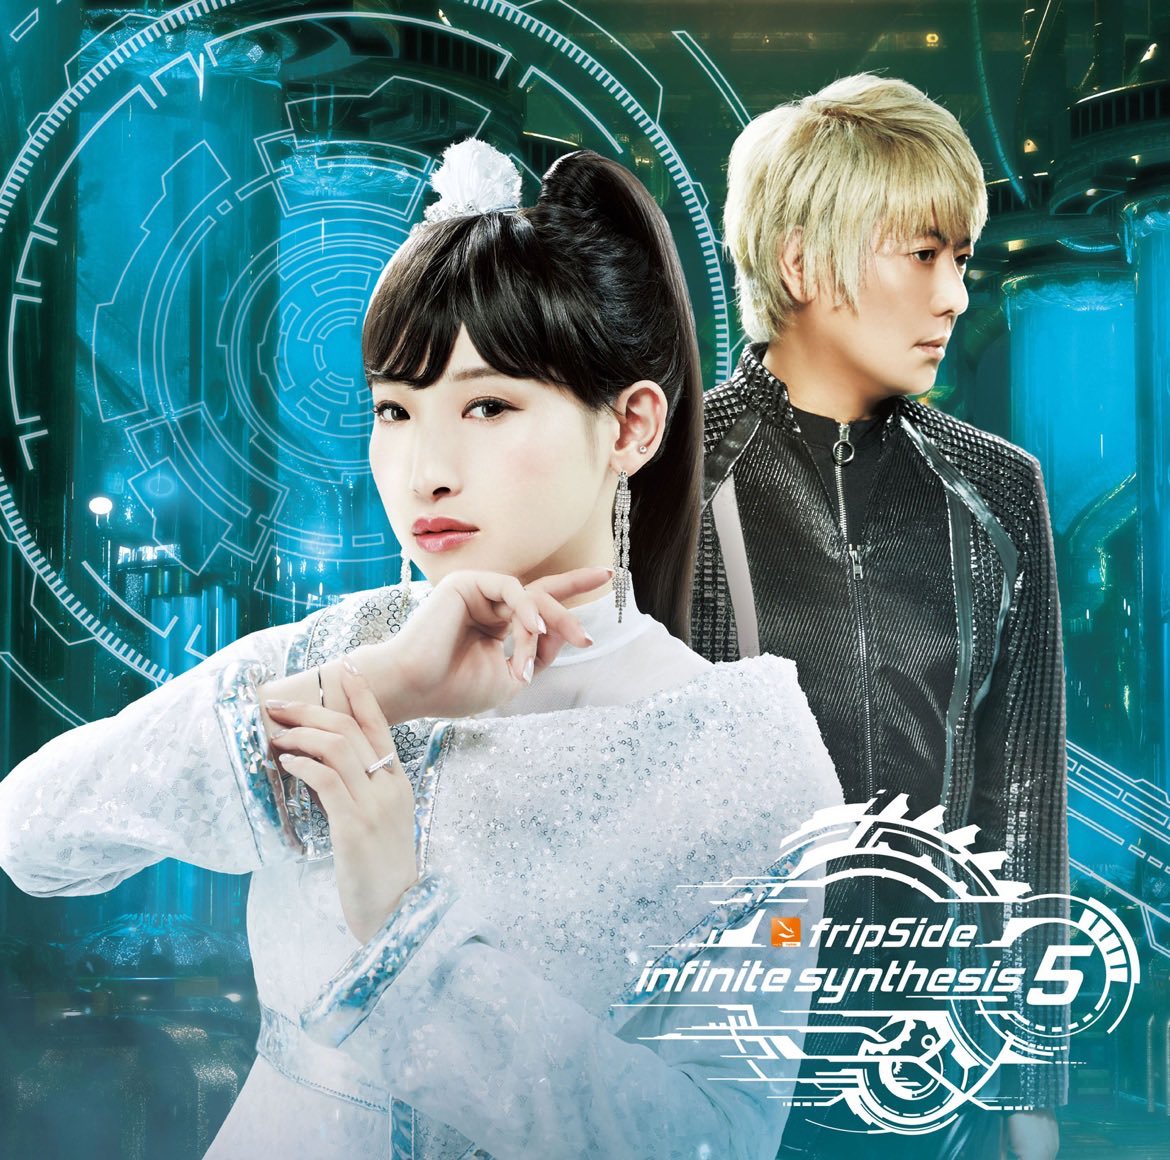 #Nowplaying 
lighting of my heart - fripSide (infinite synthesis 5)